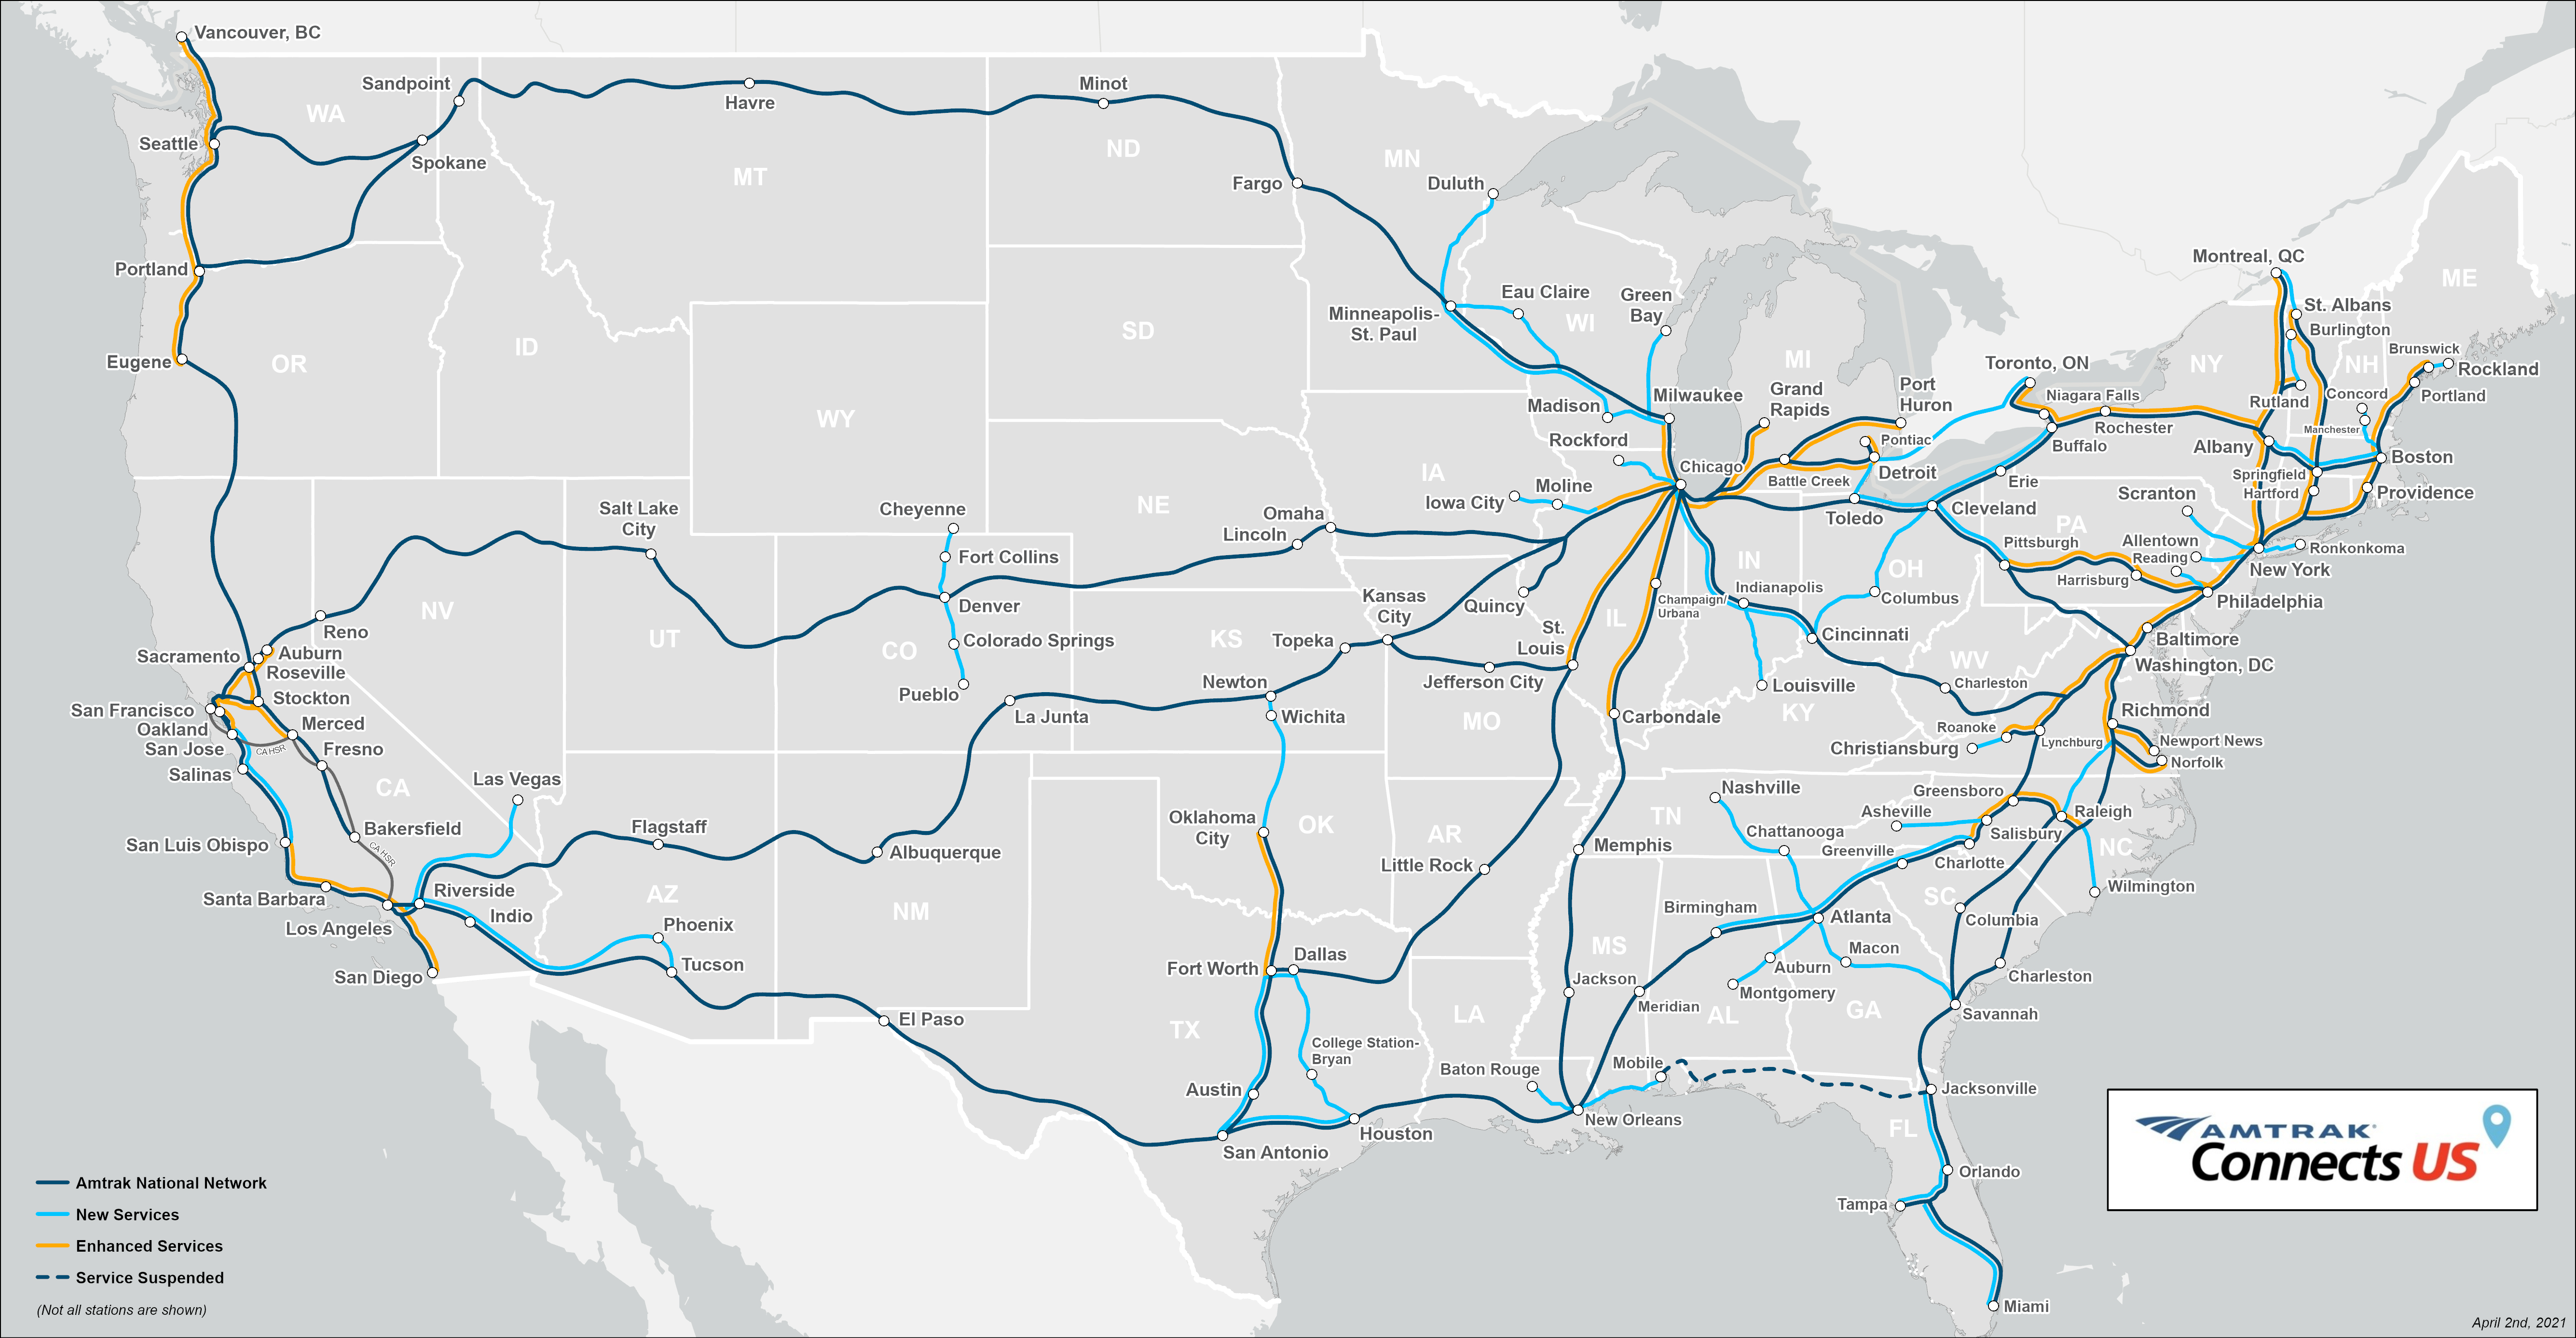 Amtrak Connects US map - March 31, 2021